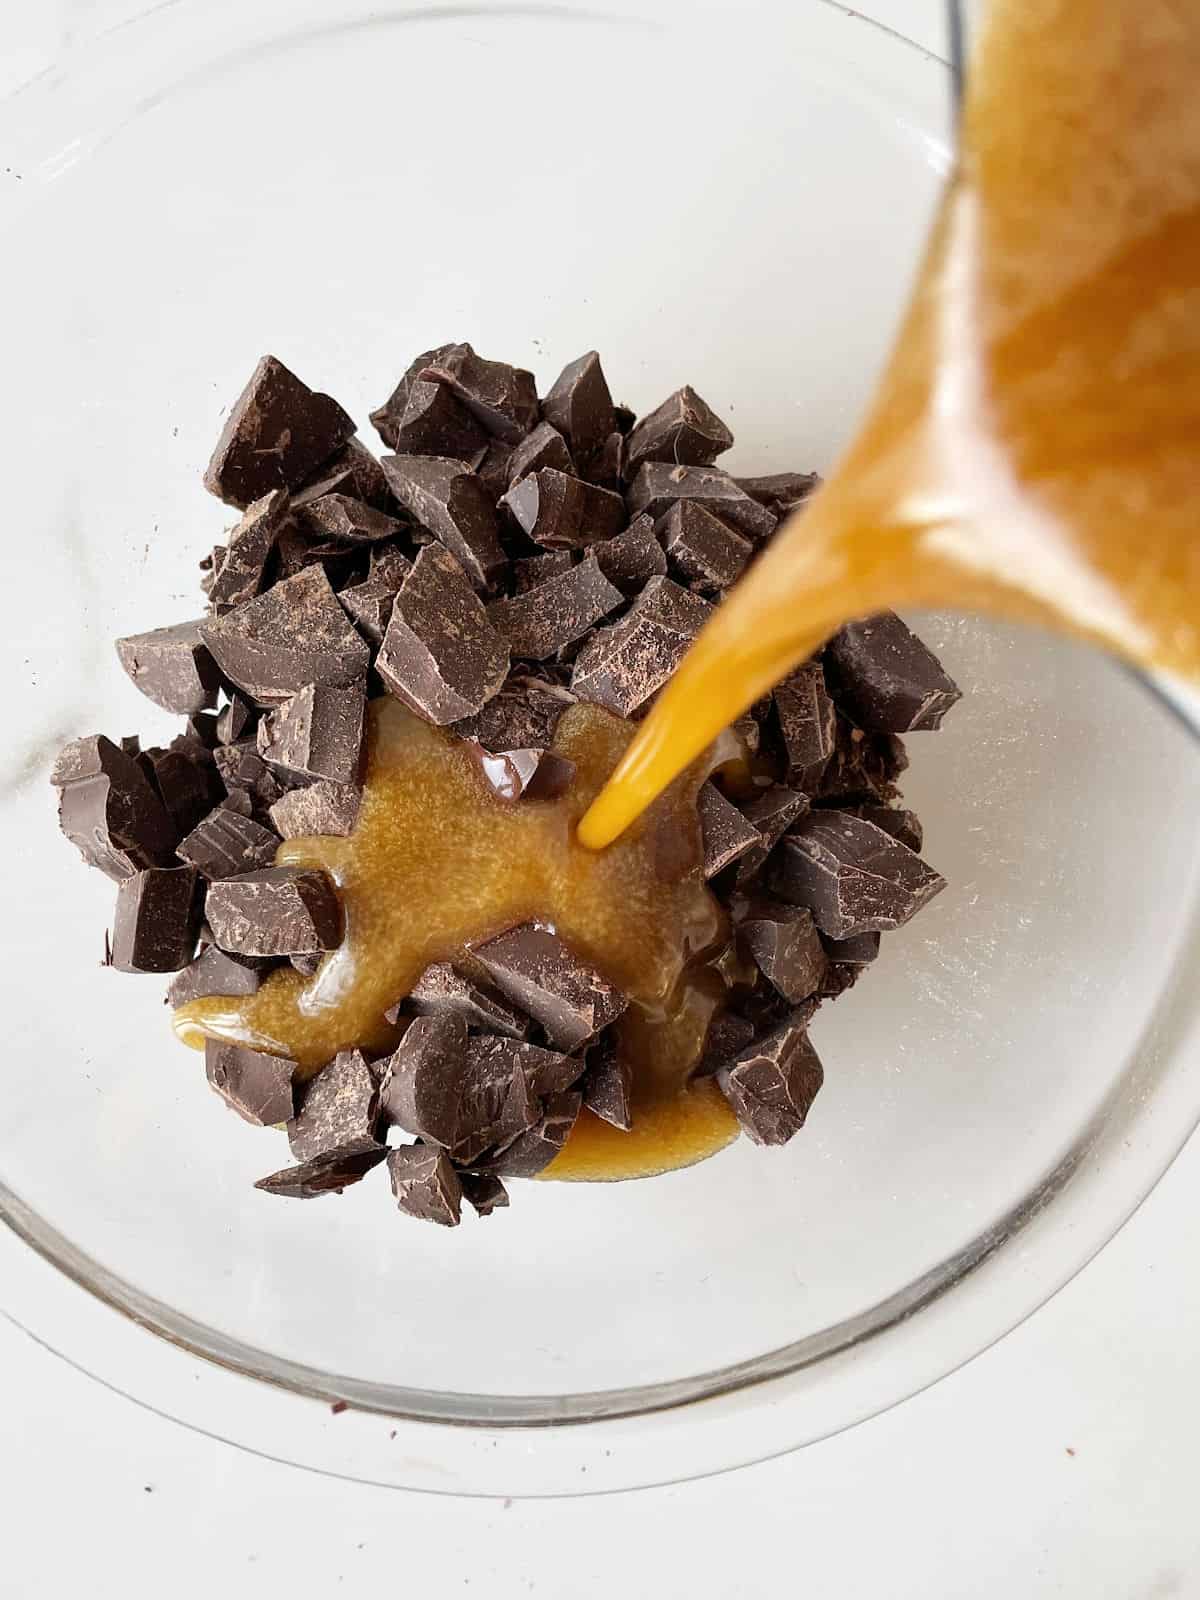 Melted brown butter mixture being poured over chopped chocolate in a glass bowl on a white surface. 